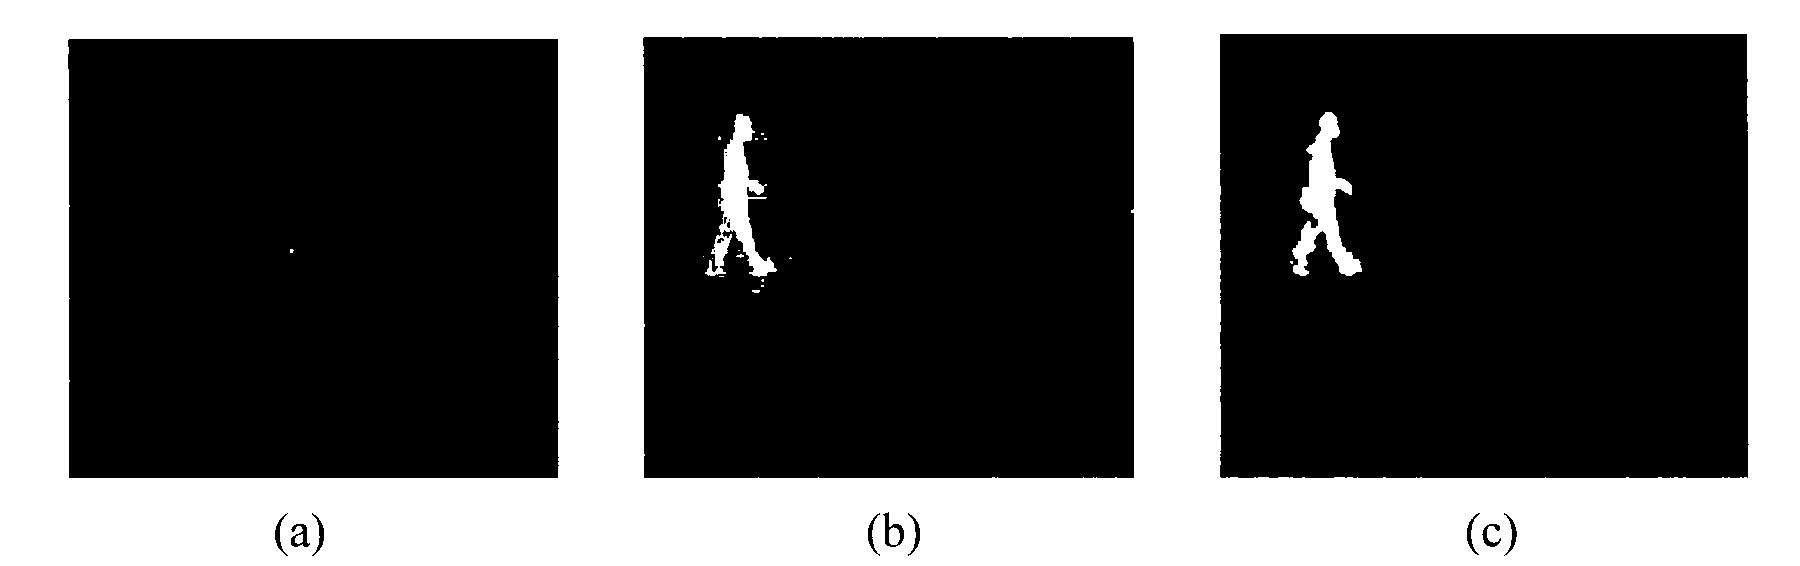 Method for extracting and identifying small sample character contour feature